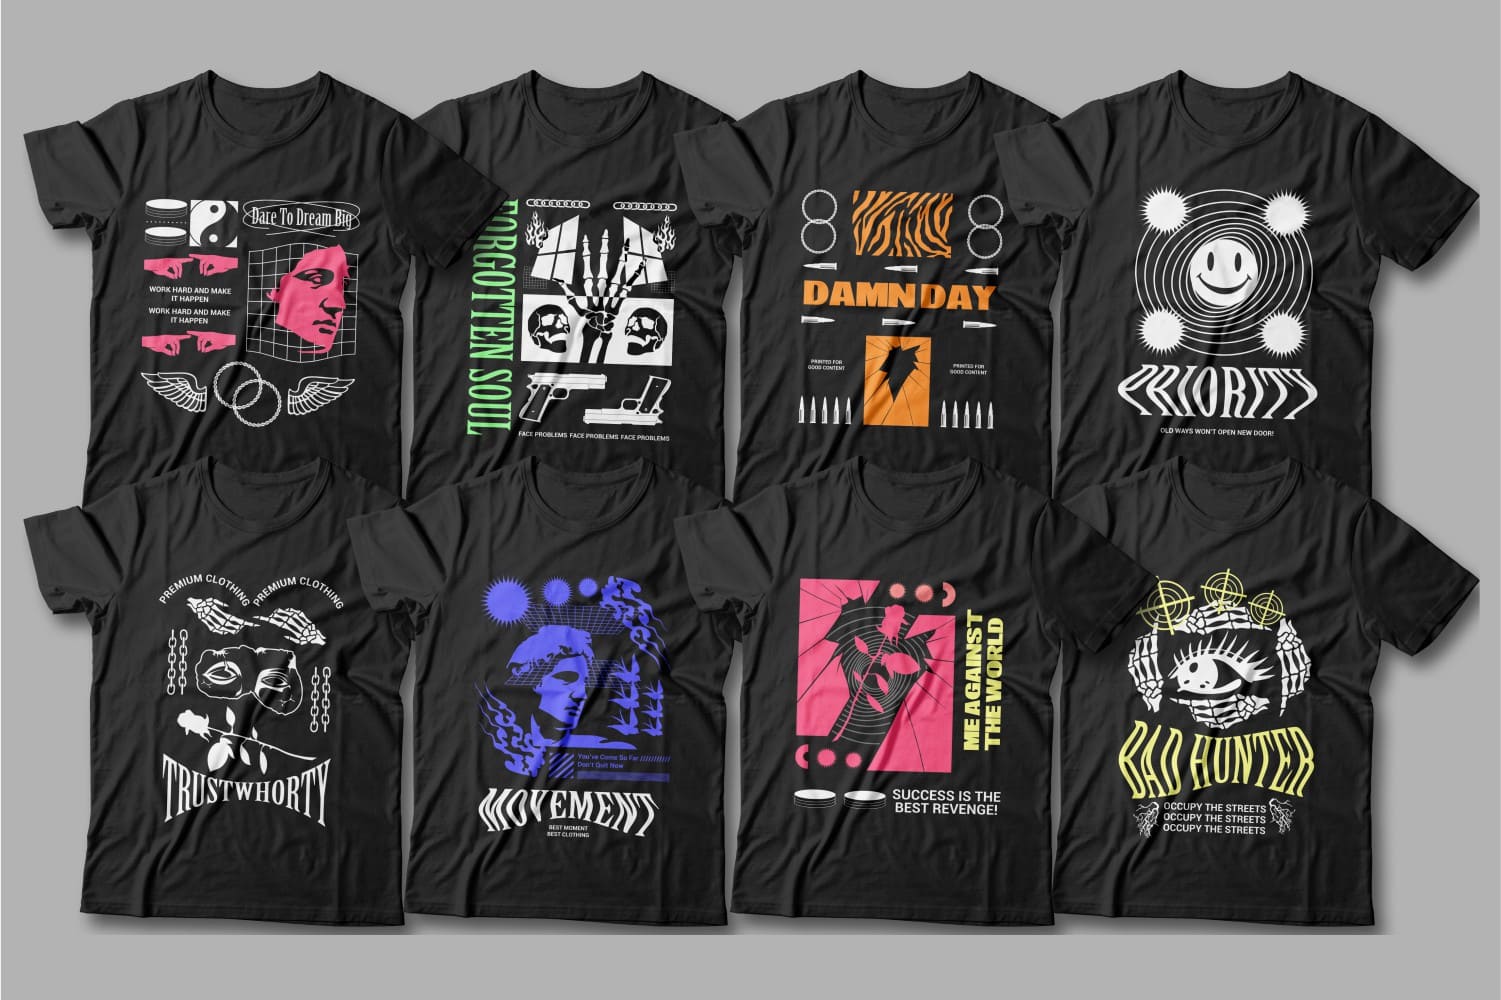 Colorful and bright graphics on the black t-shirts.